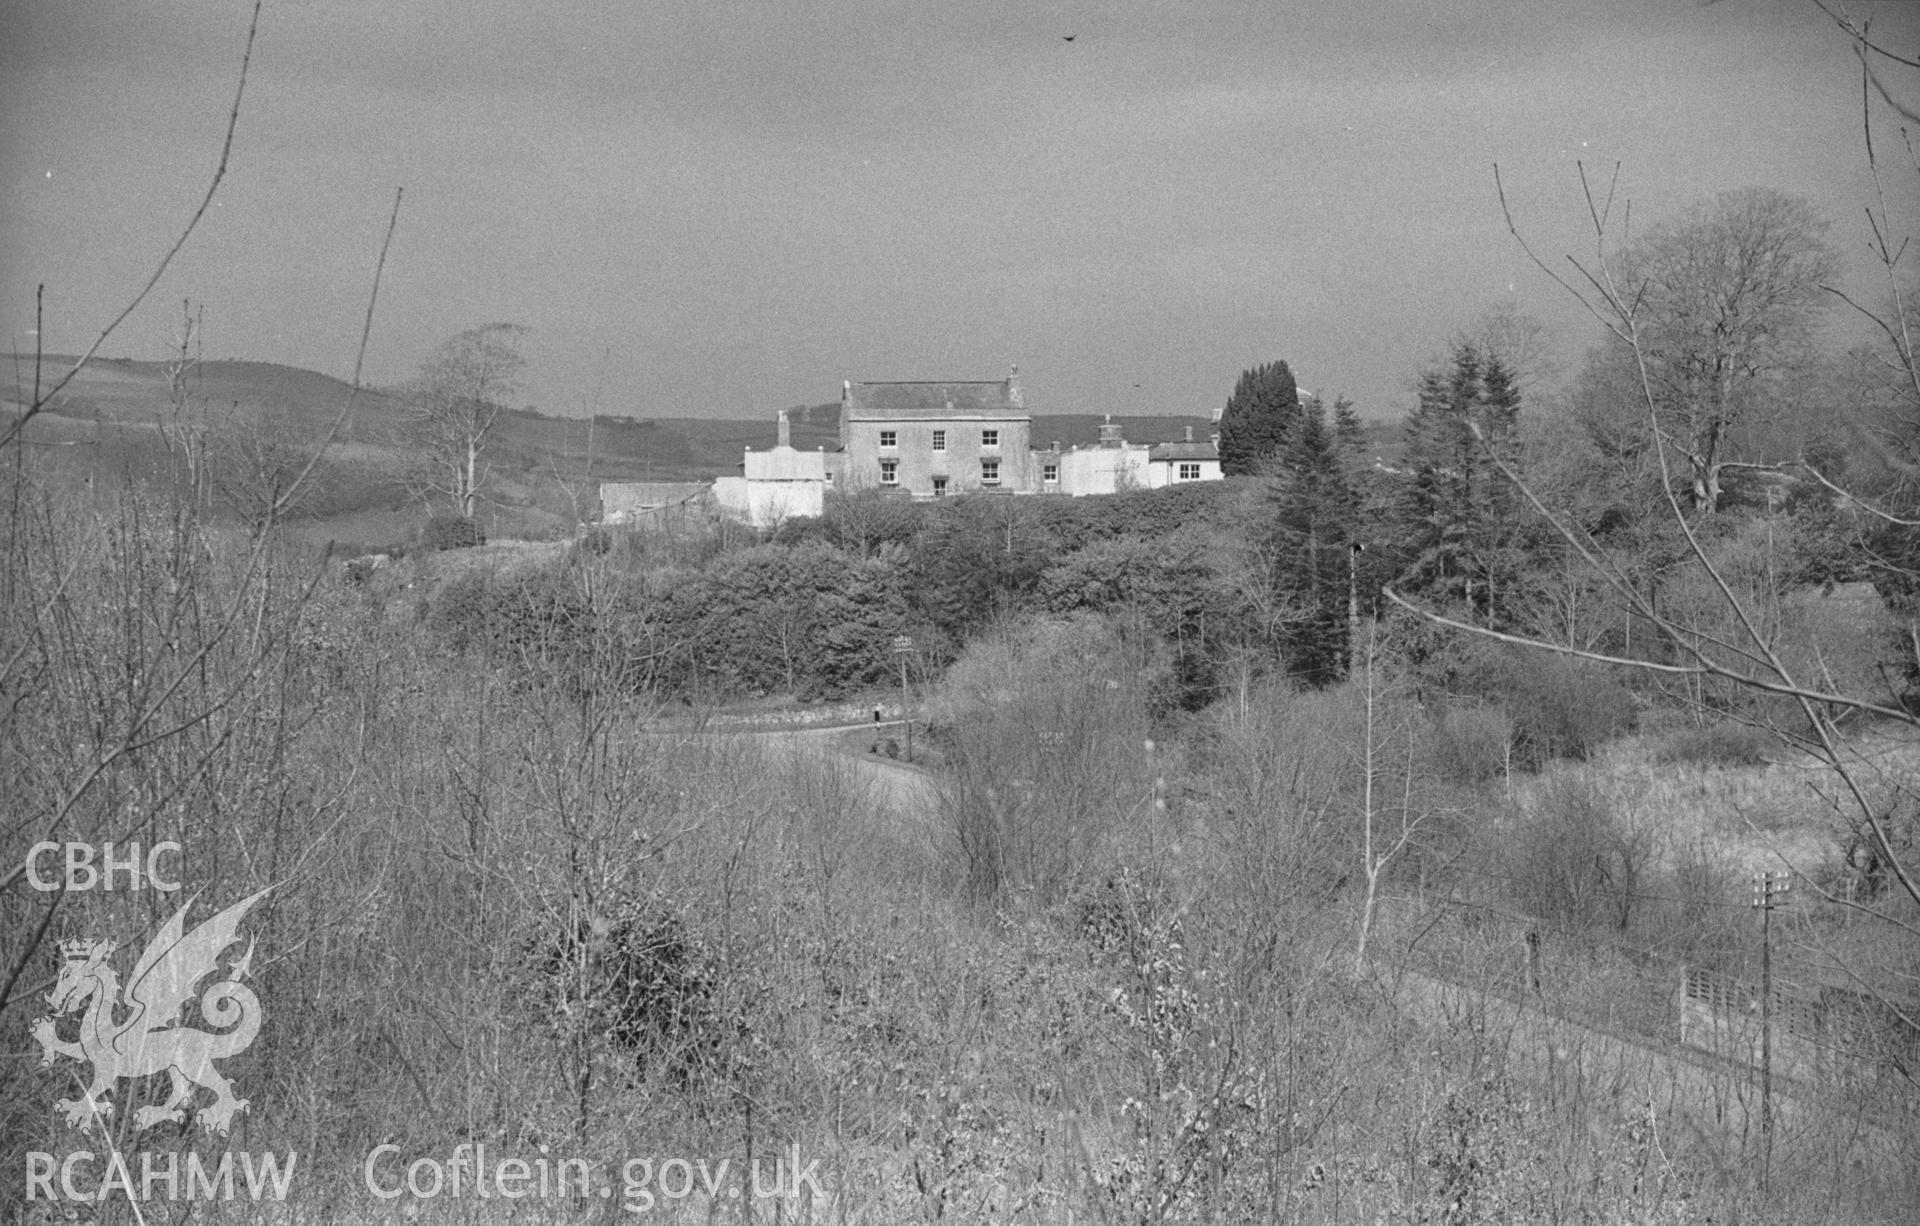 Black and White photograph showing Castle Hill, Llanilar, from the footpath across Nant Adal. Photographed by Arthur Chater in April 1962 from Grid Reference SN 624 746, looking north east.